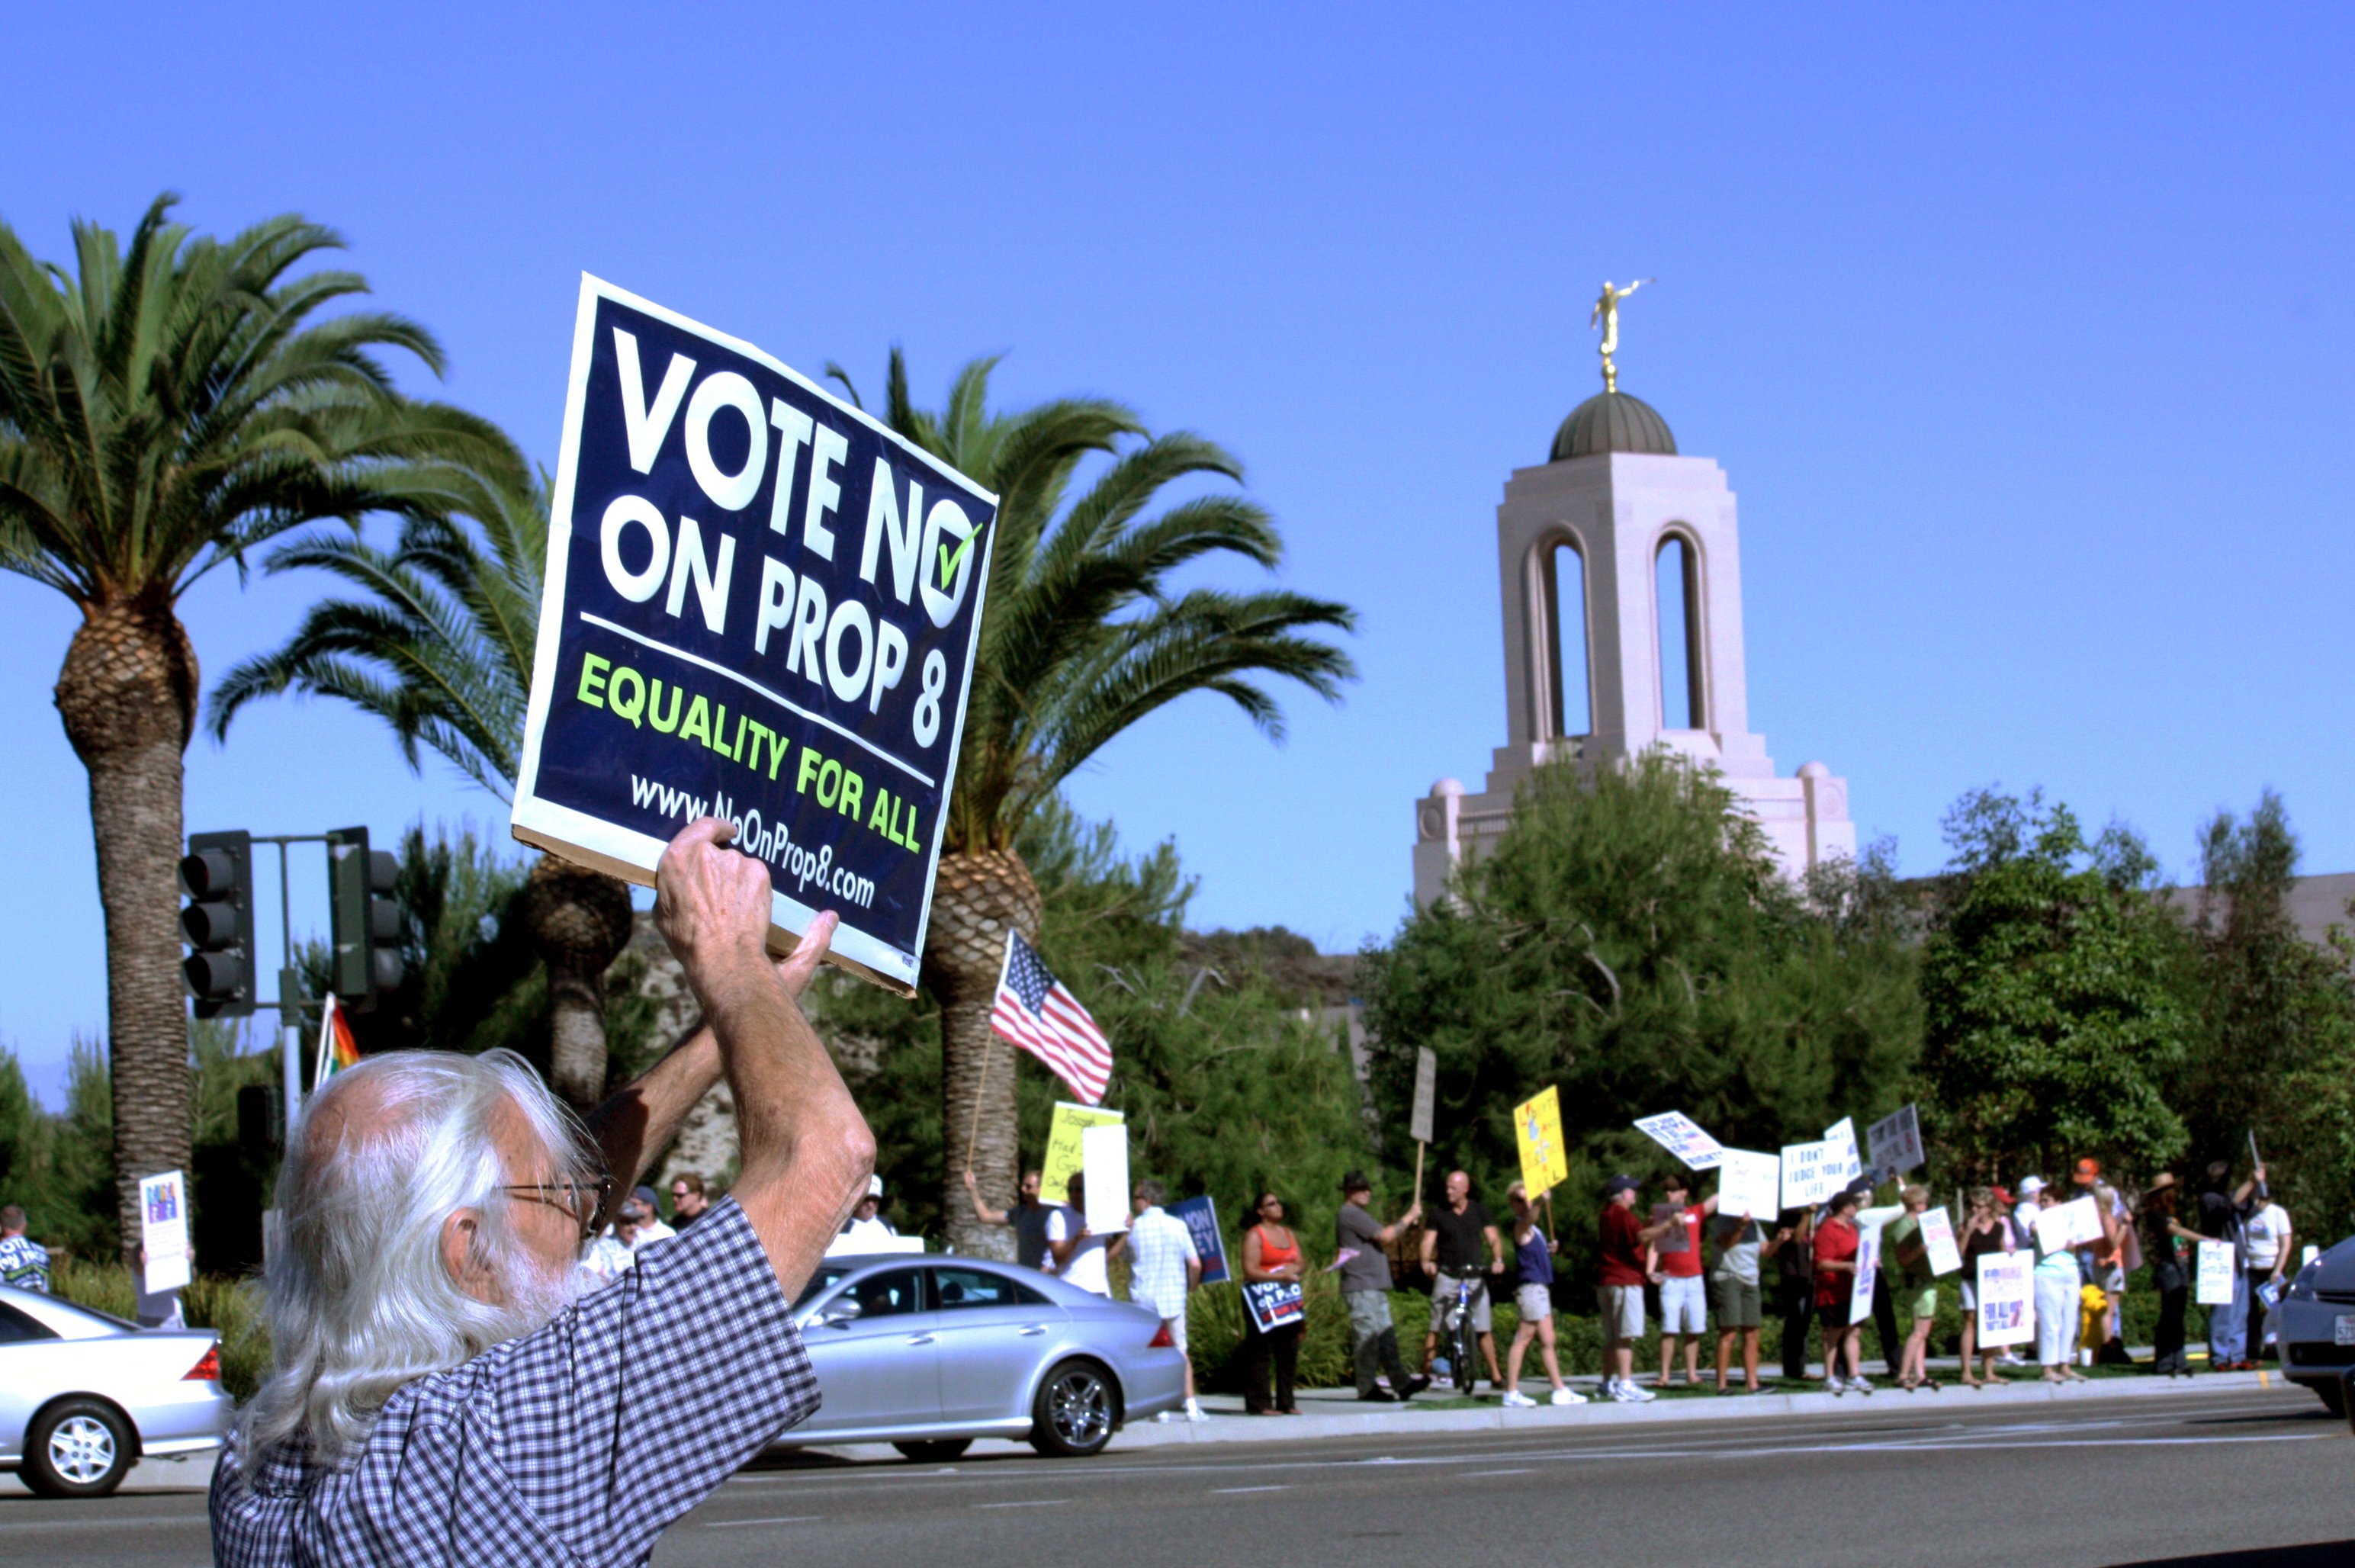 A man with gray hair holds a sign that says 'vote no on prop 8 - equality for all' outside of the LDS Newport temple in California.